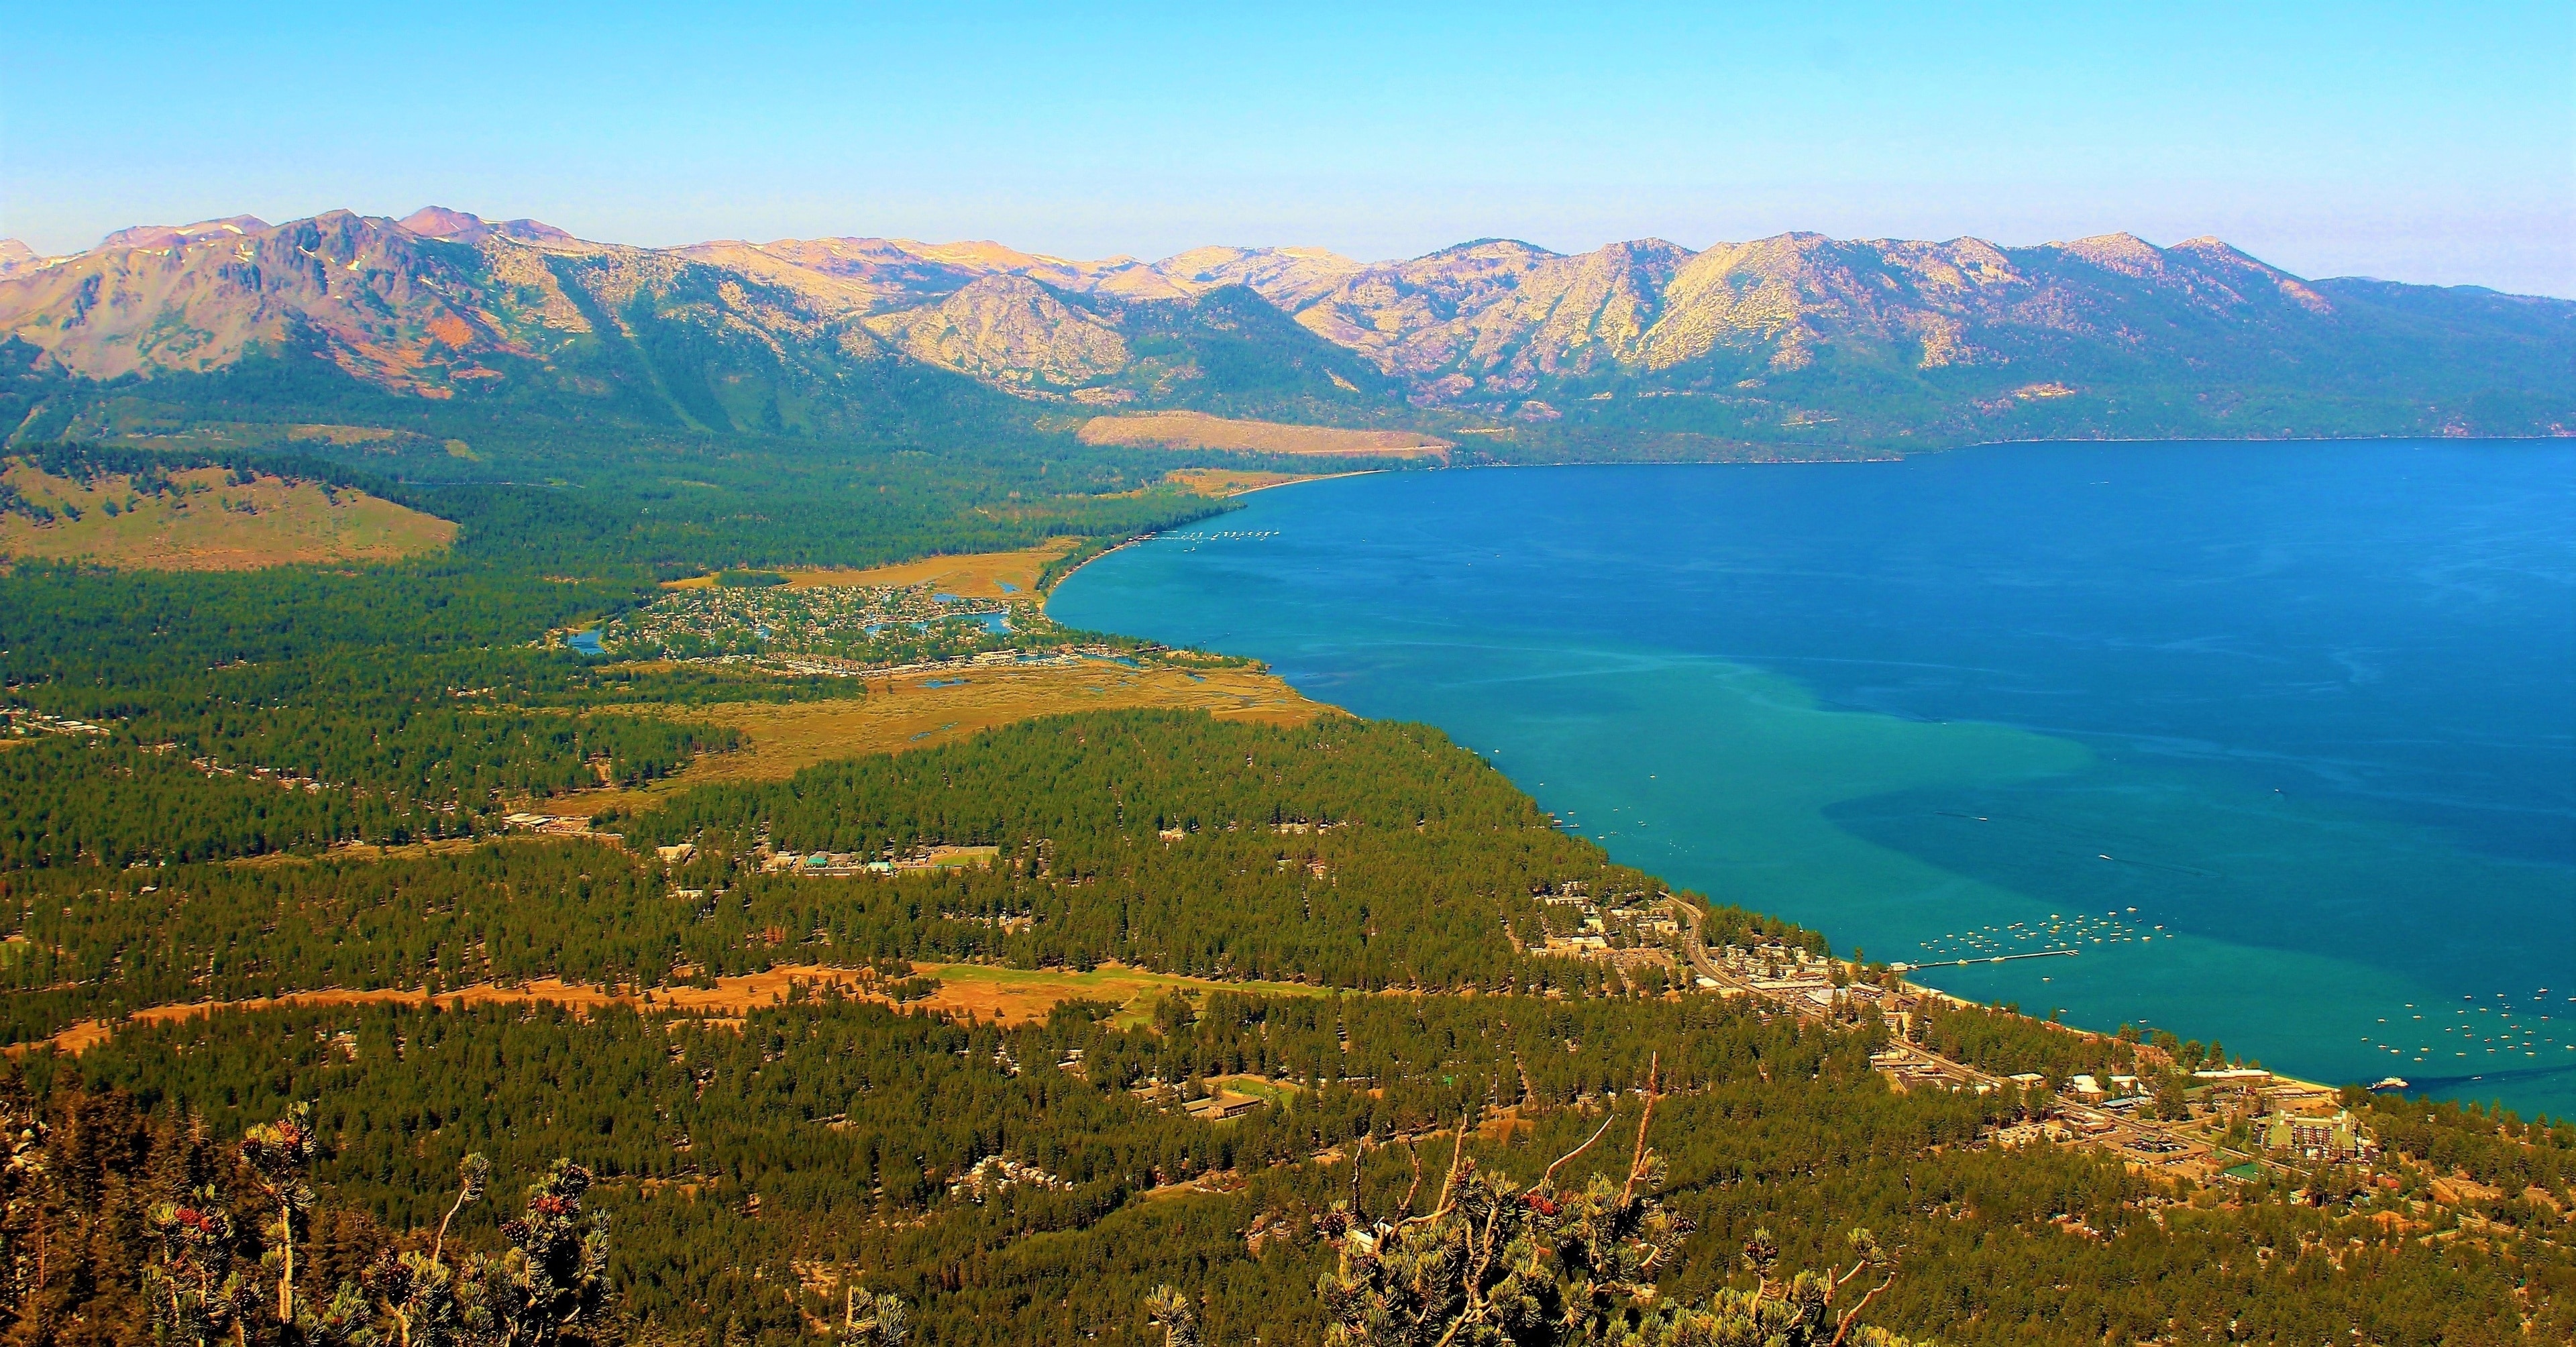 I took this at South Lake Tahoe, California on August 29th. Taken high above the lake, at Heavenly Gondola Vista Point :). This is one of the most iconic views of Lake Tahoe, a lake very popular among Americans. I loved seeing the gorgeous, colorful lake. And the vast landscape surrounding it. The lush, green forest seemed to go on forever. And the mountains were epic! You can even see some snow still atop the mountains. But best of all was the deep, serene lake! I was also at Tahoe for a family wedding. A perfect place for such an occasion! 